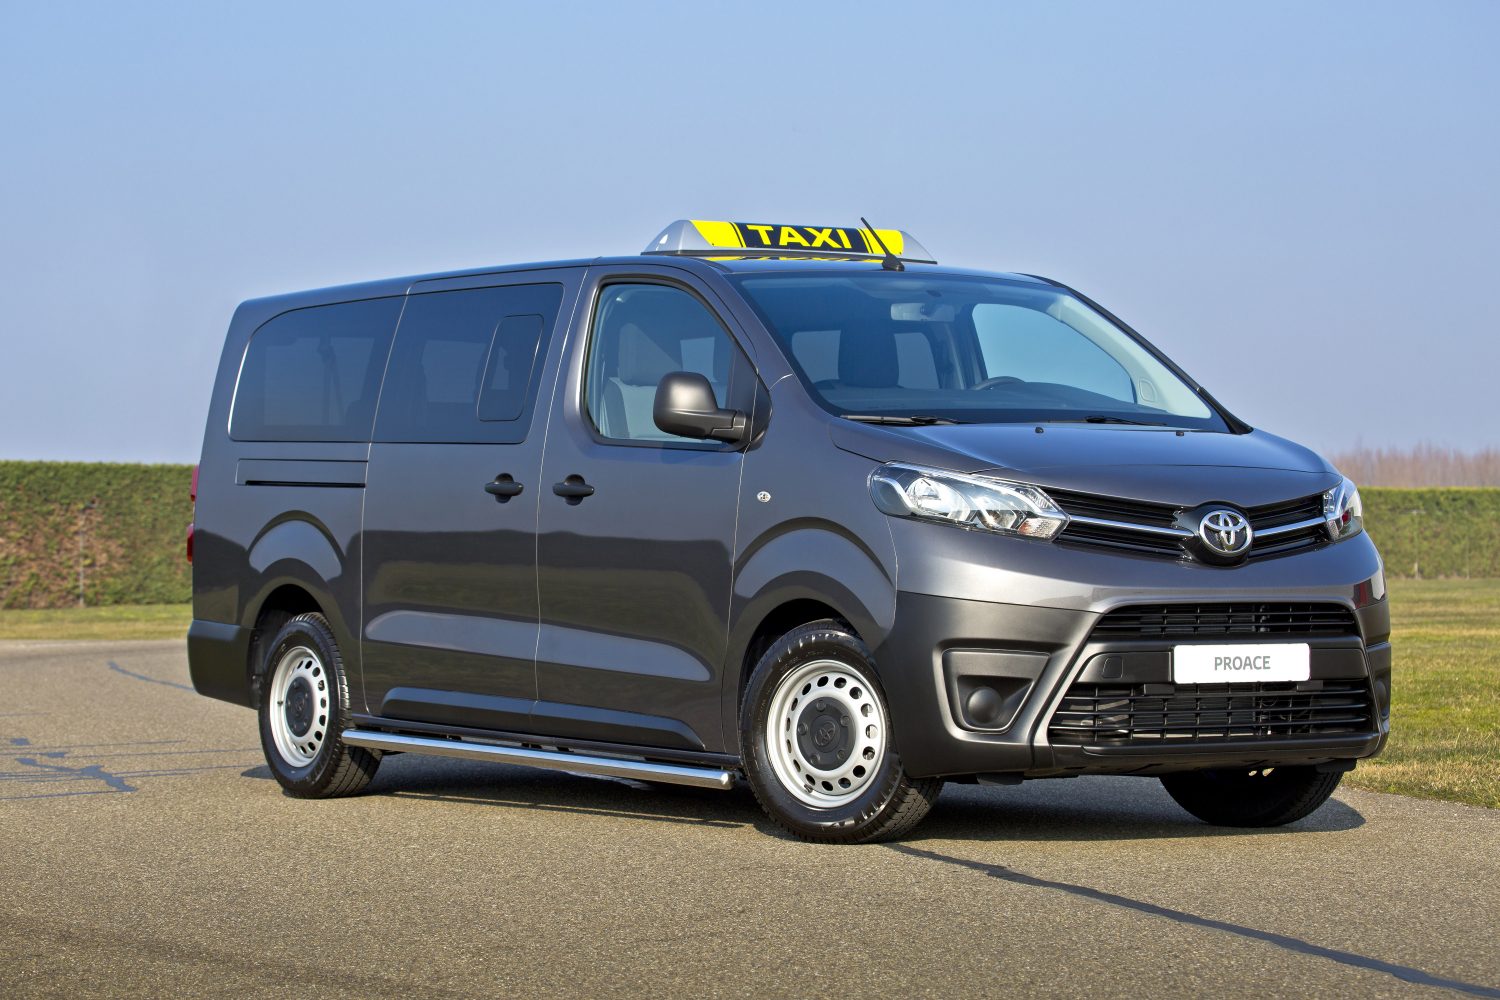 Toyota Proace Taxi